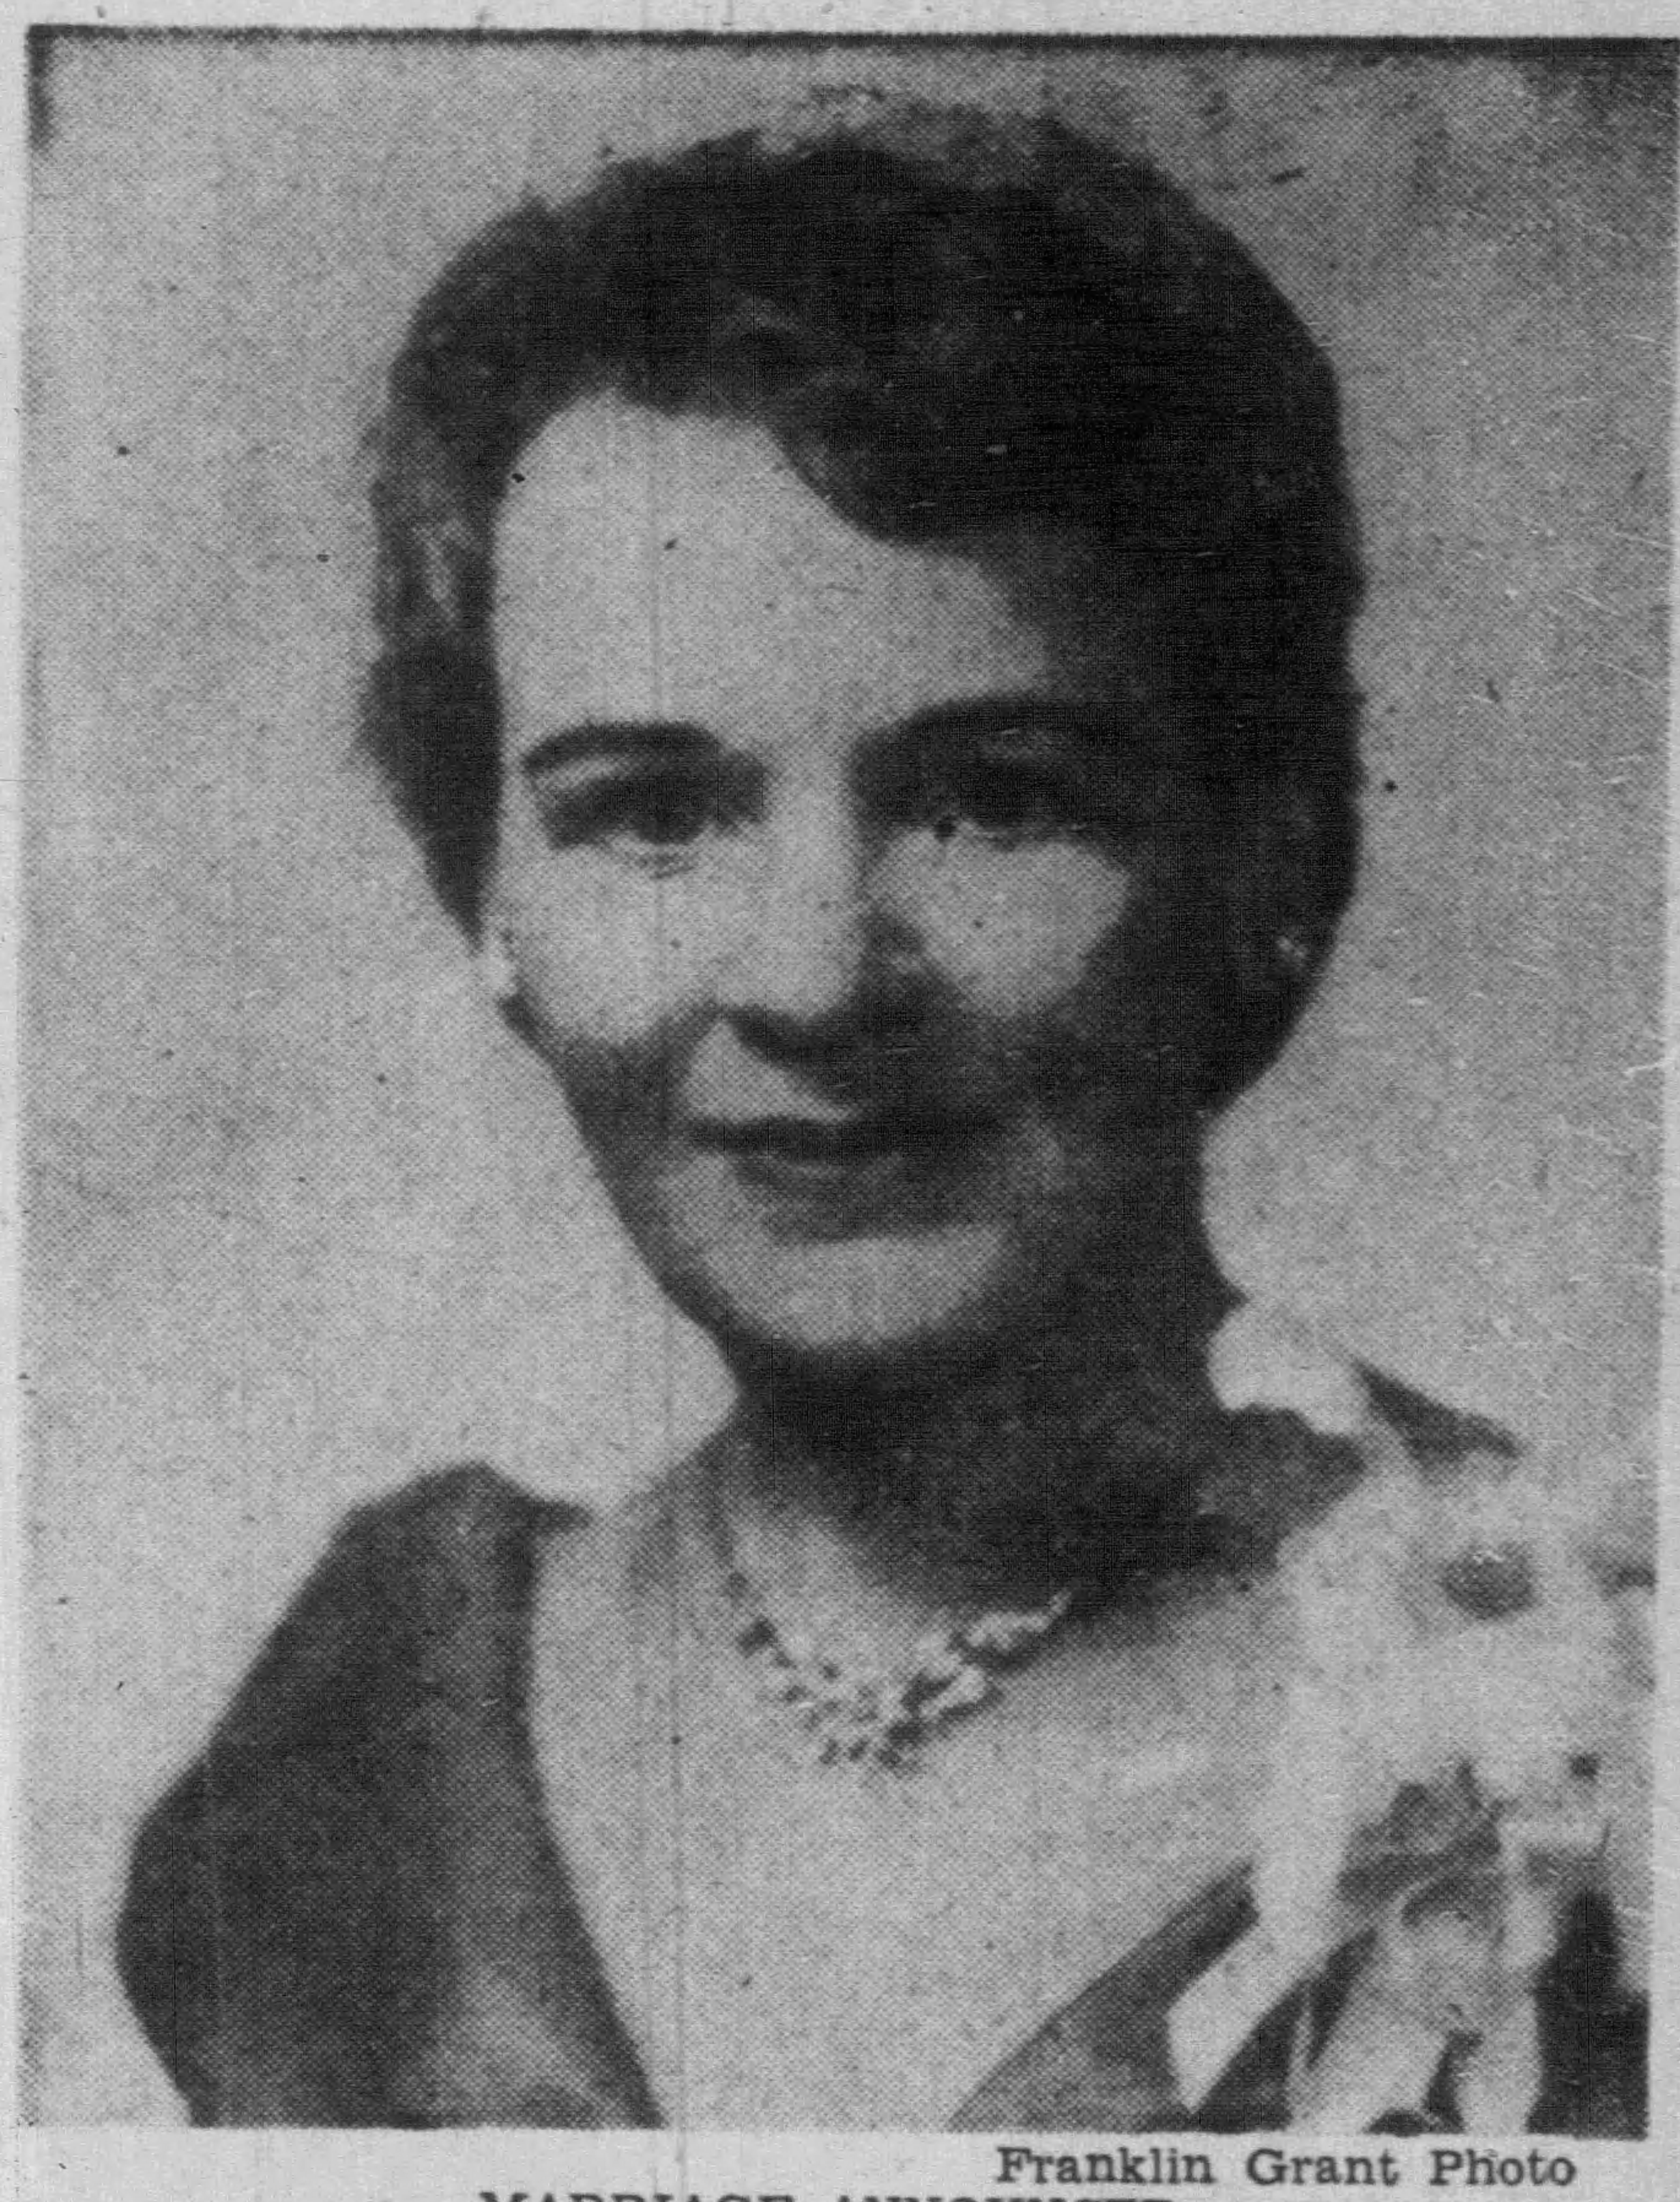 In 1956, after her second marriage. (Source: Portland Press Herald, 25 March 1956)